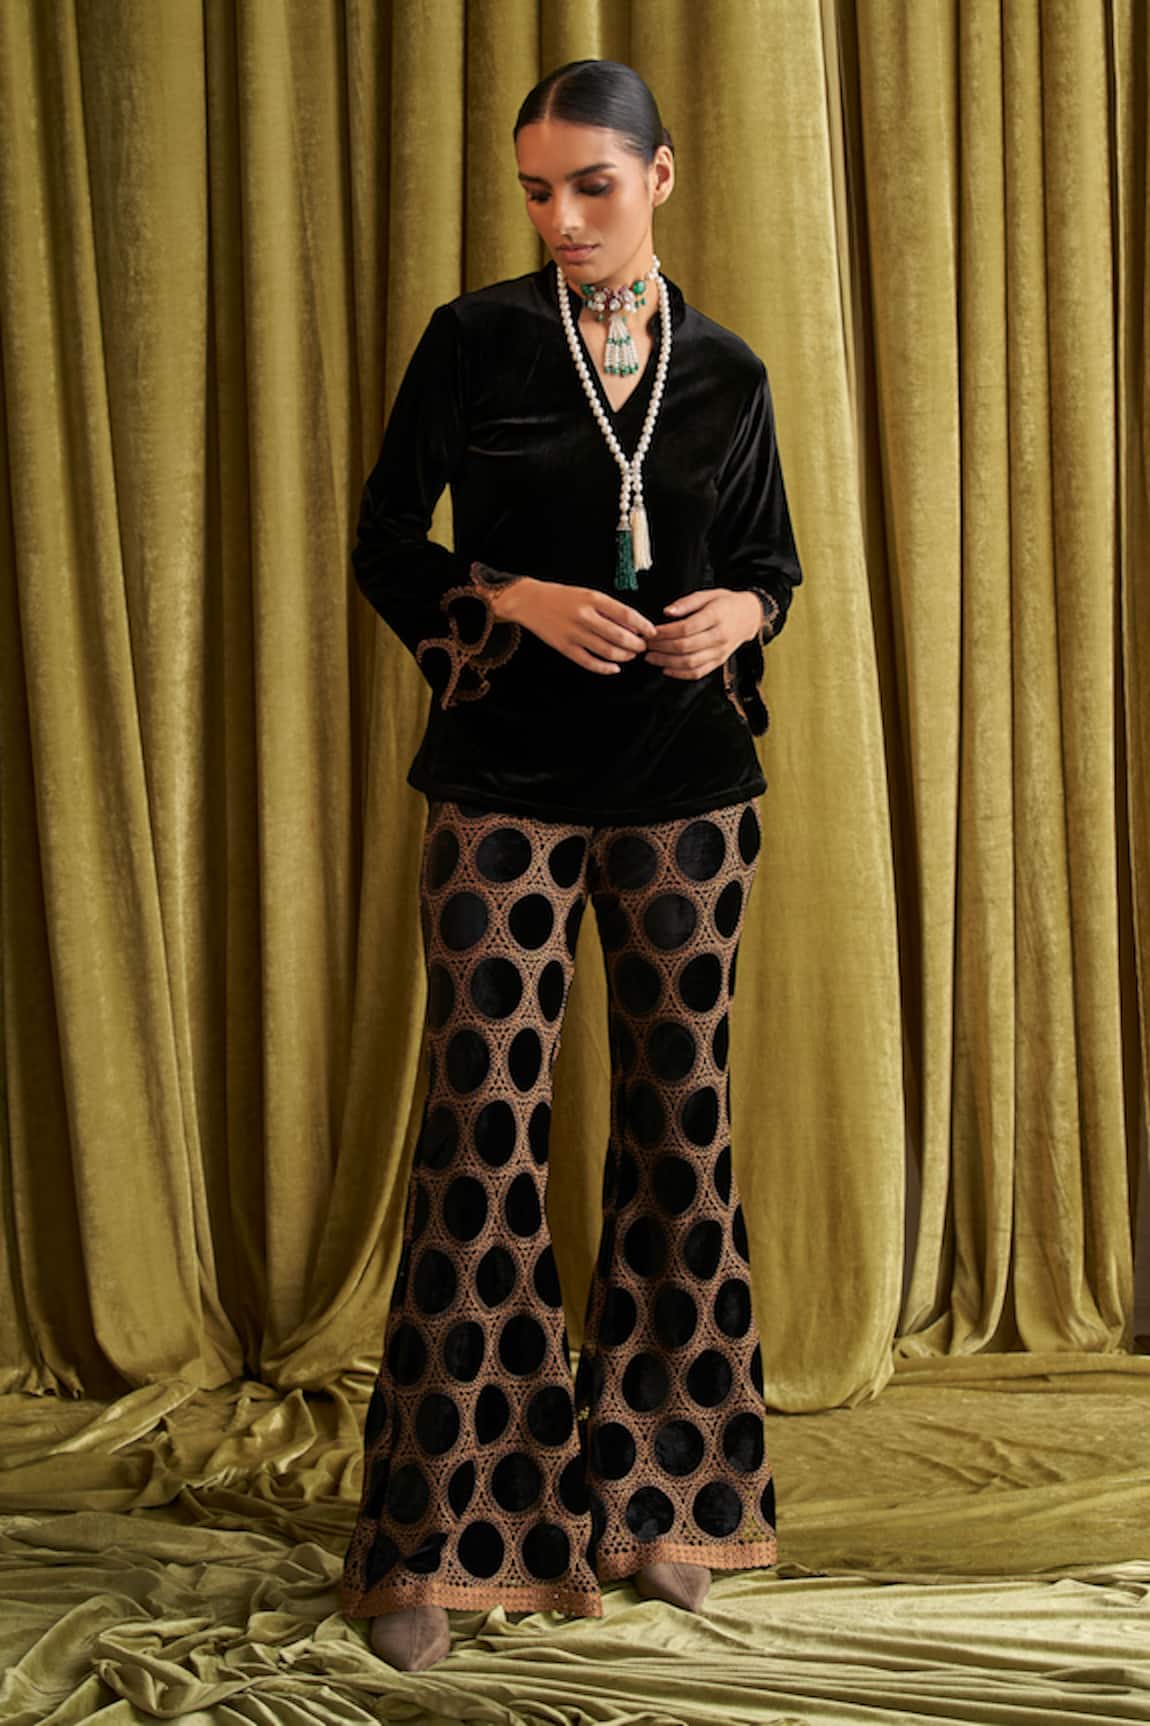 QALA CLOTHING Anya Velvet Top With Embroidered Pant